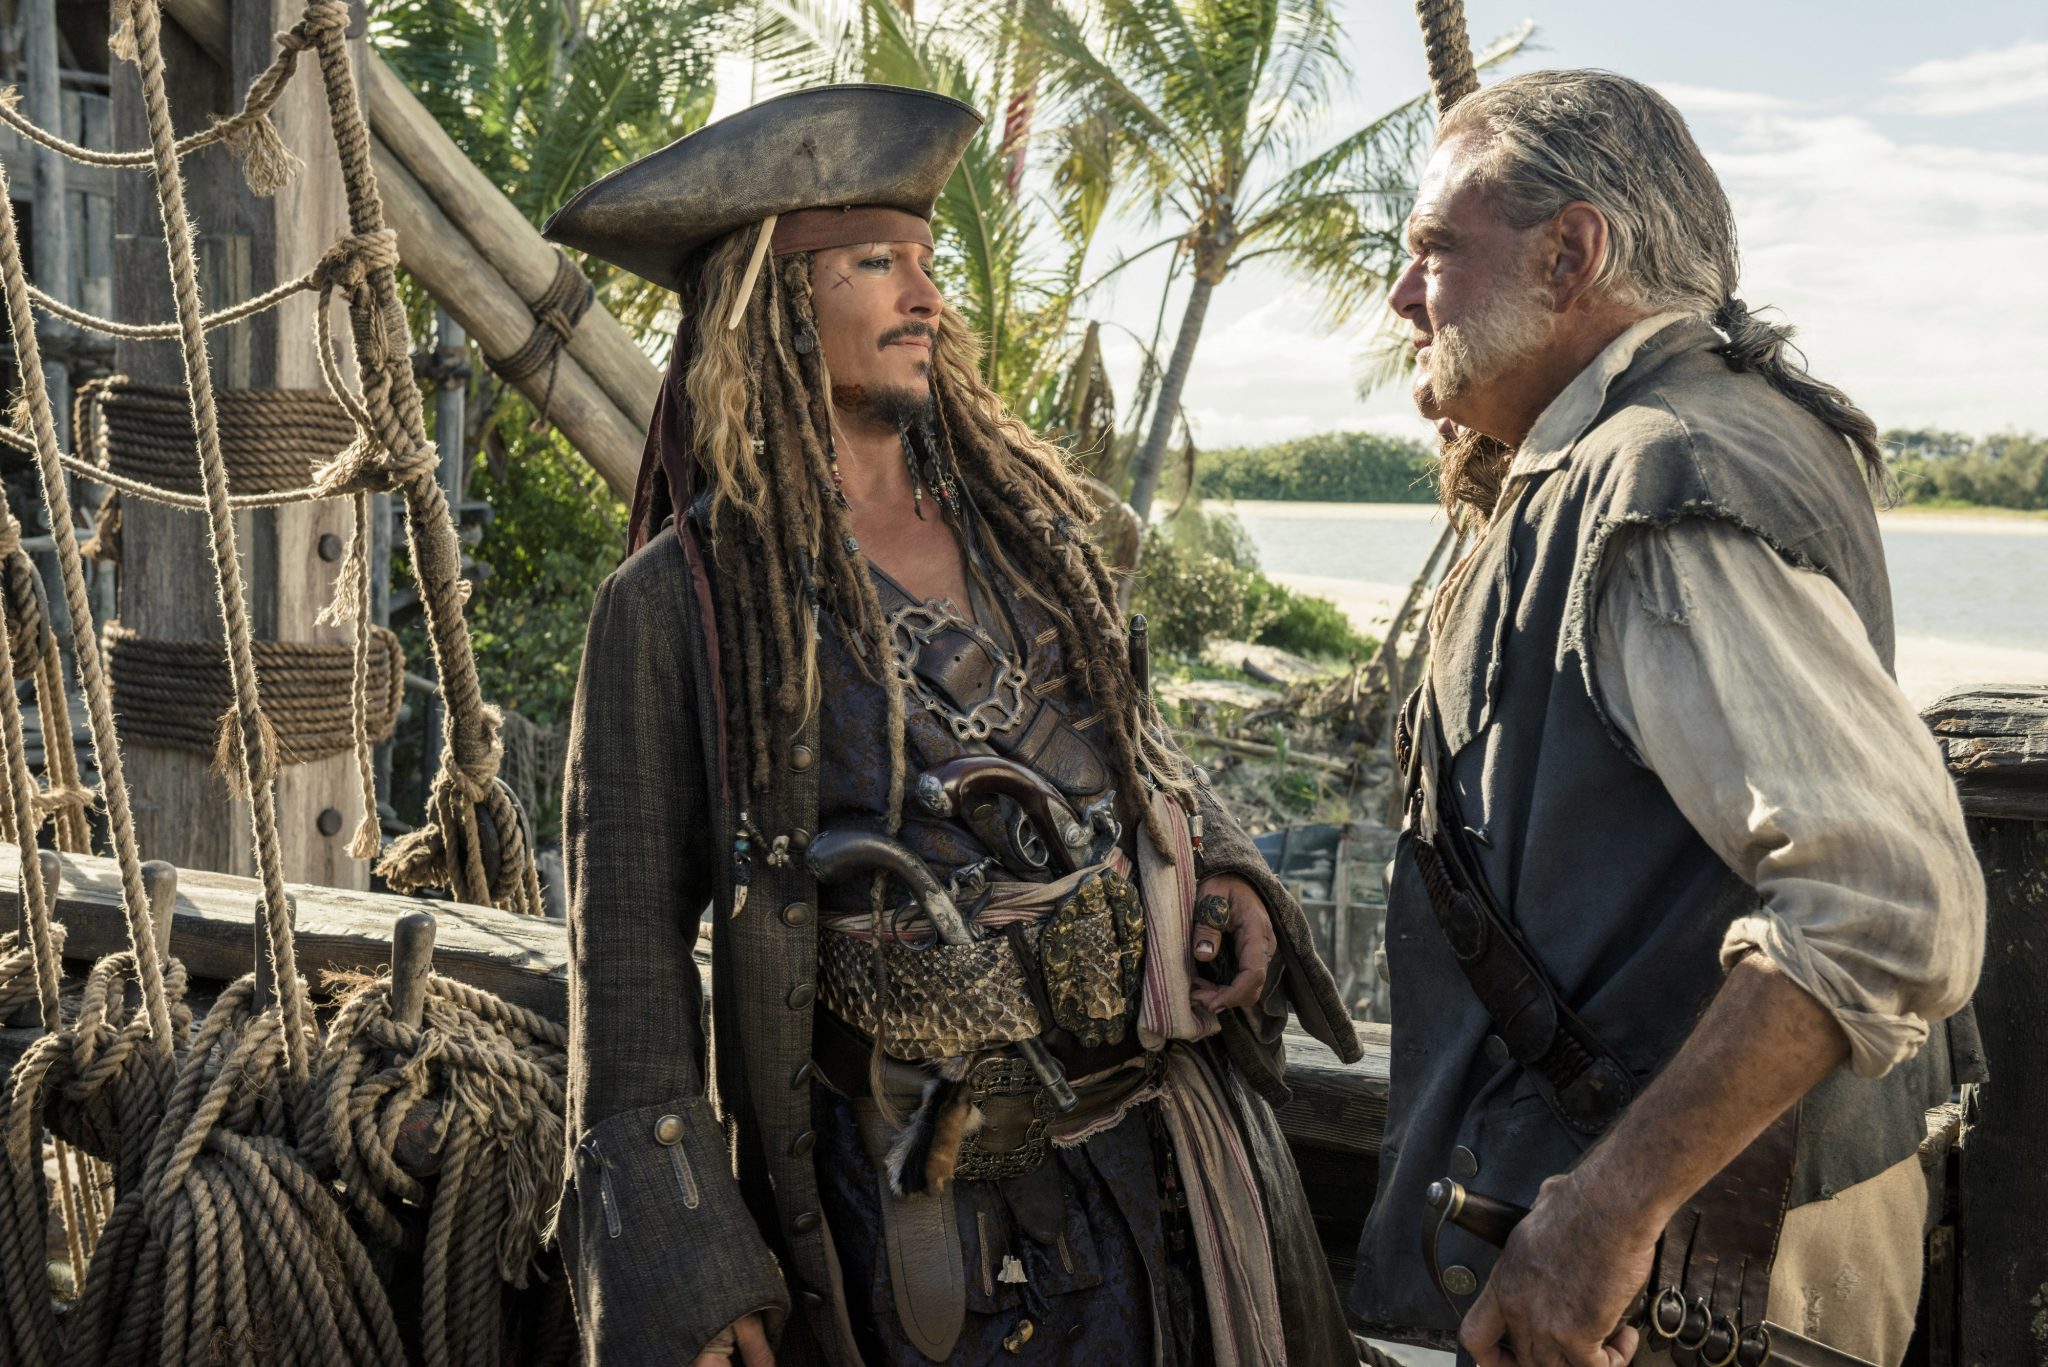 Disney Studios Reportedly Looking to Set Sail with Pirates of the Caribbean Franchise Again with Deadpool Writers Onboard